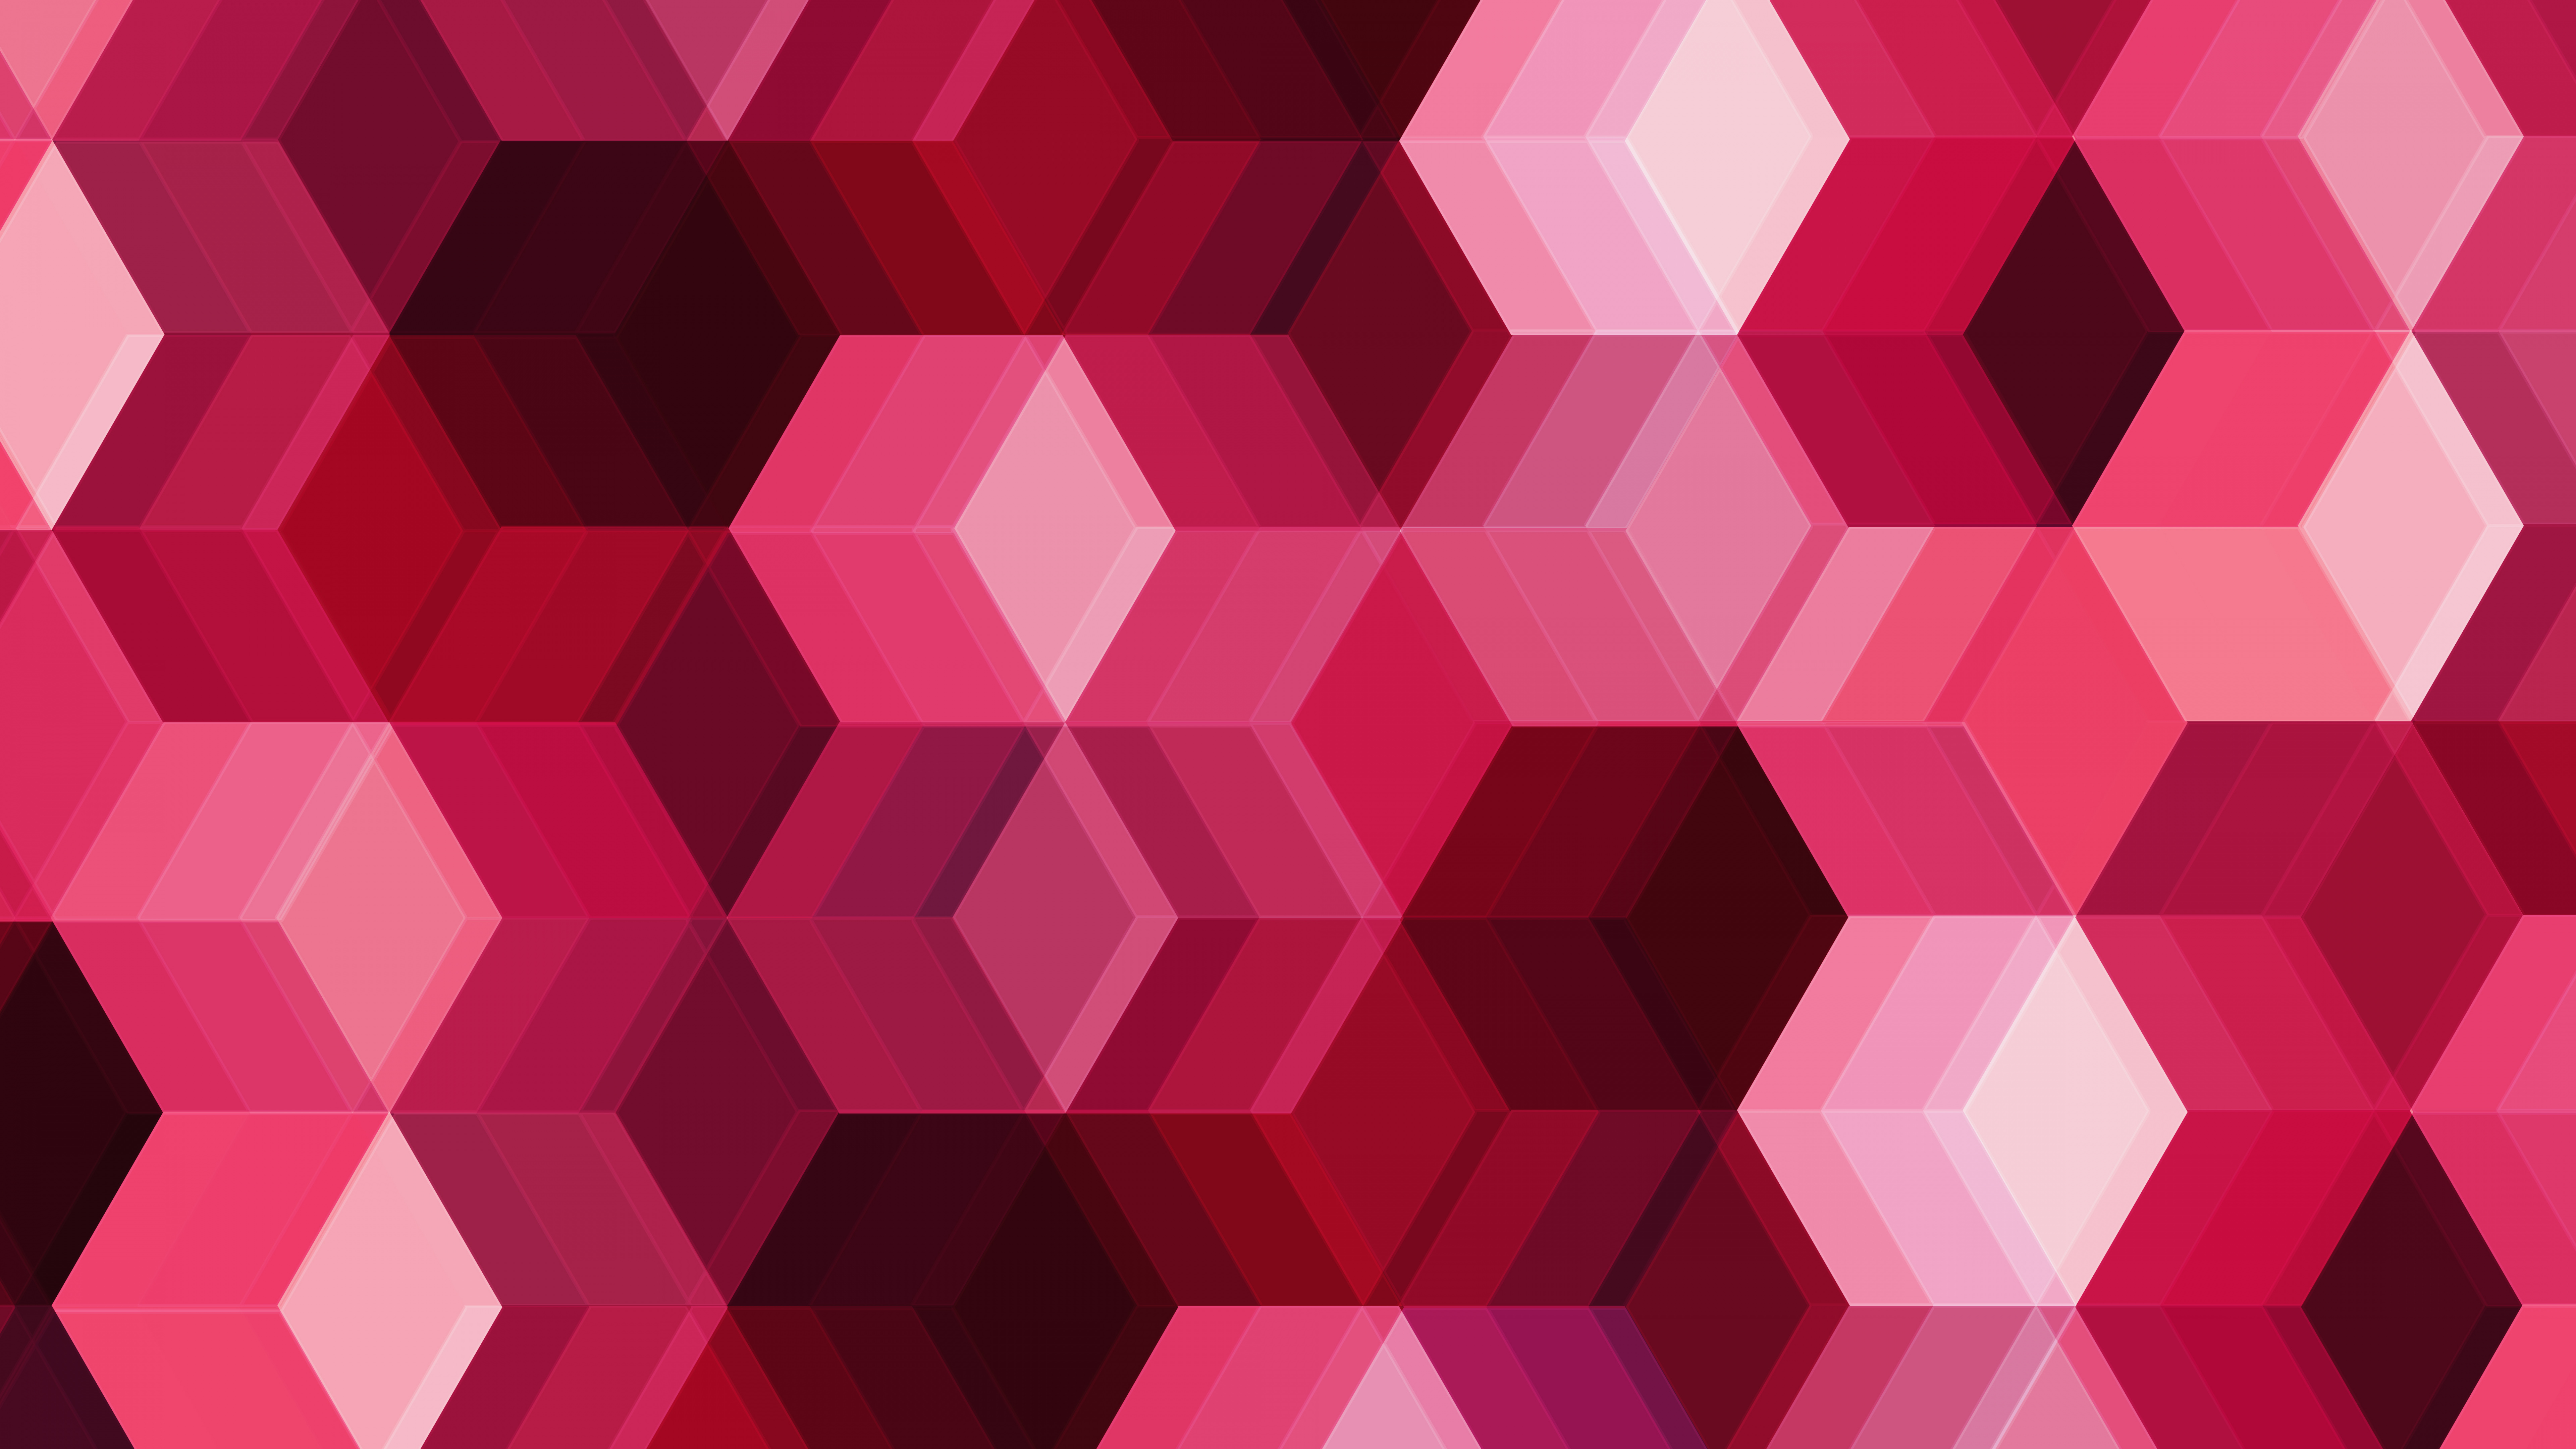 Red and White Checkered Textile. Wallpaper in 7680x4320 Resolution